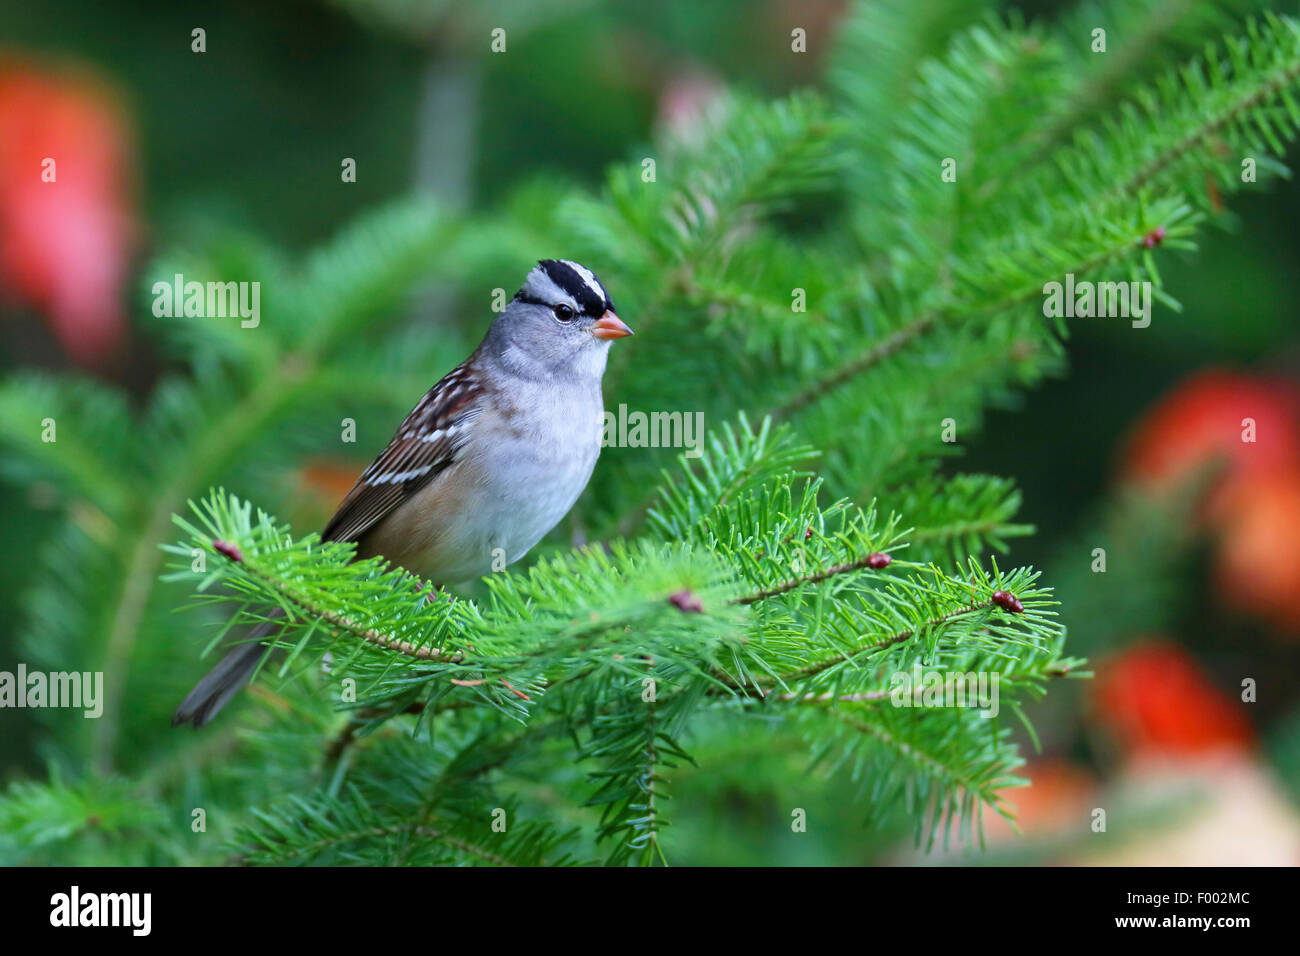 White-crowned sparrow (Zonotrichia leucophrys), sitting in a Douglas spruce, Canada, Ontario, Algonquin Provincial Park Stock Photo